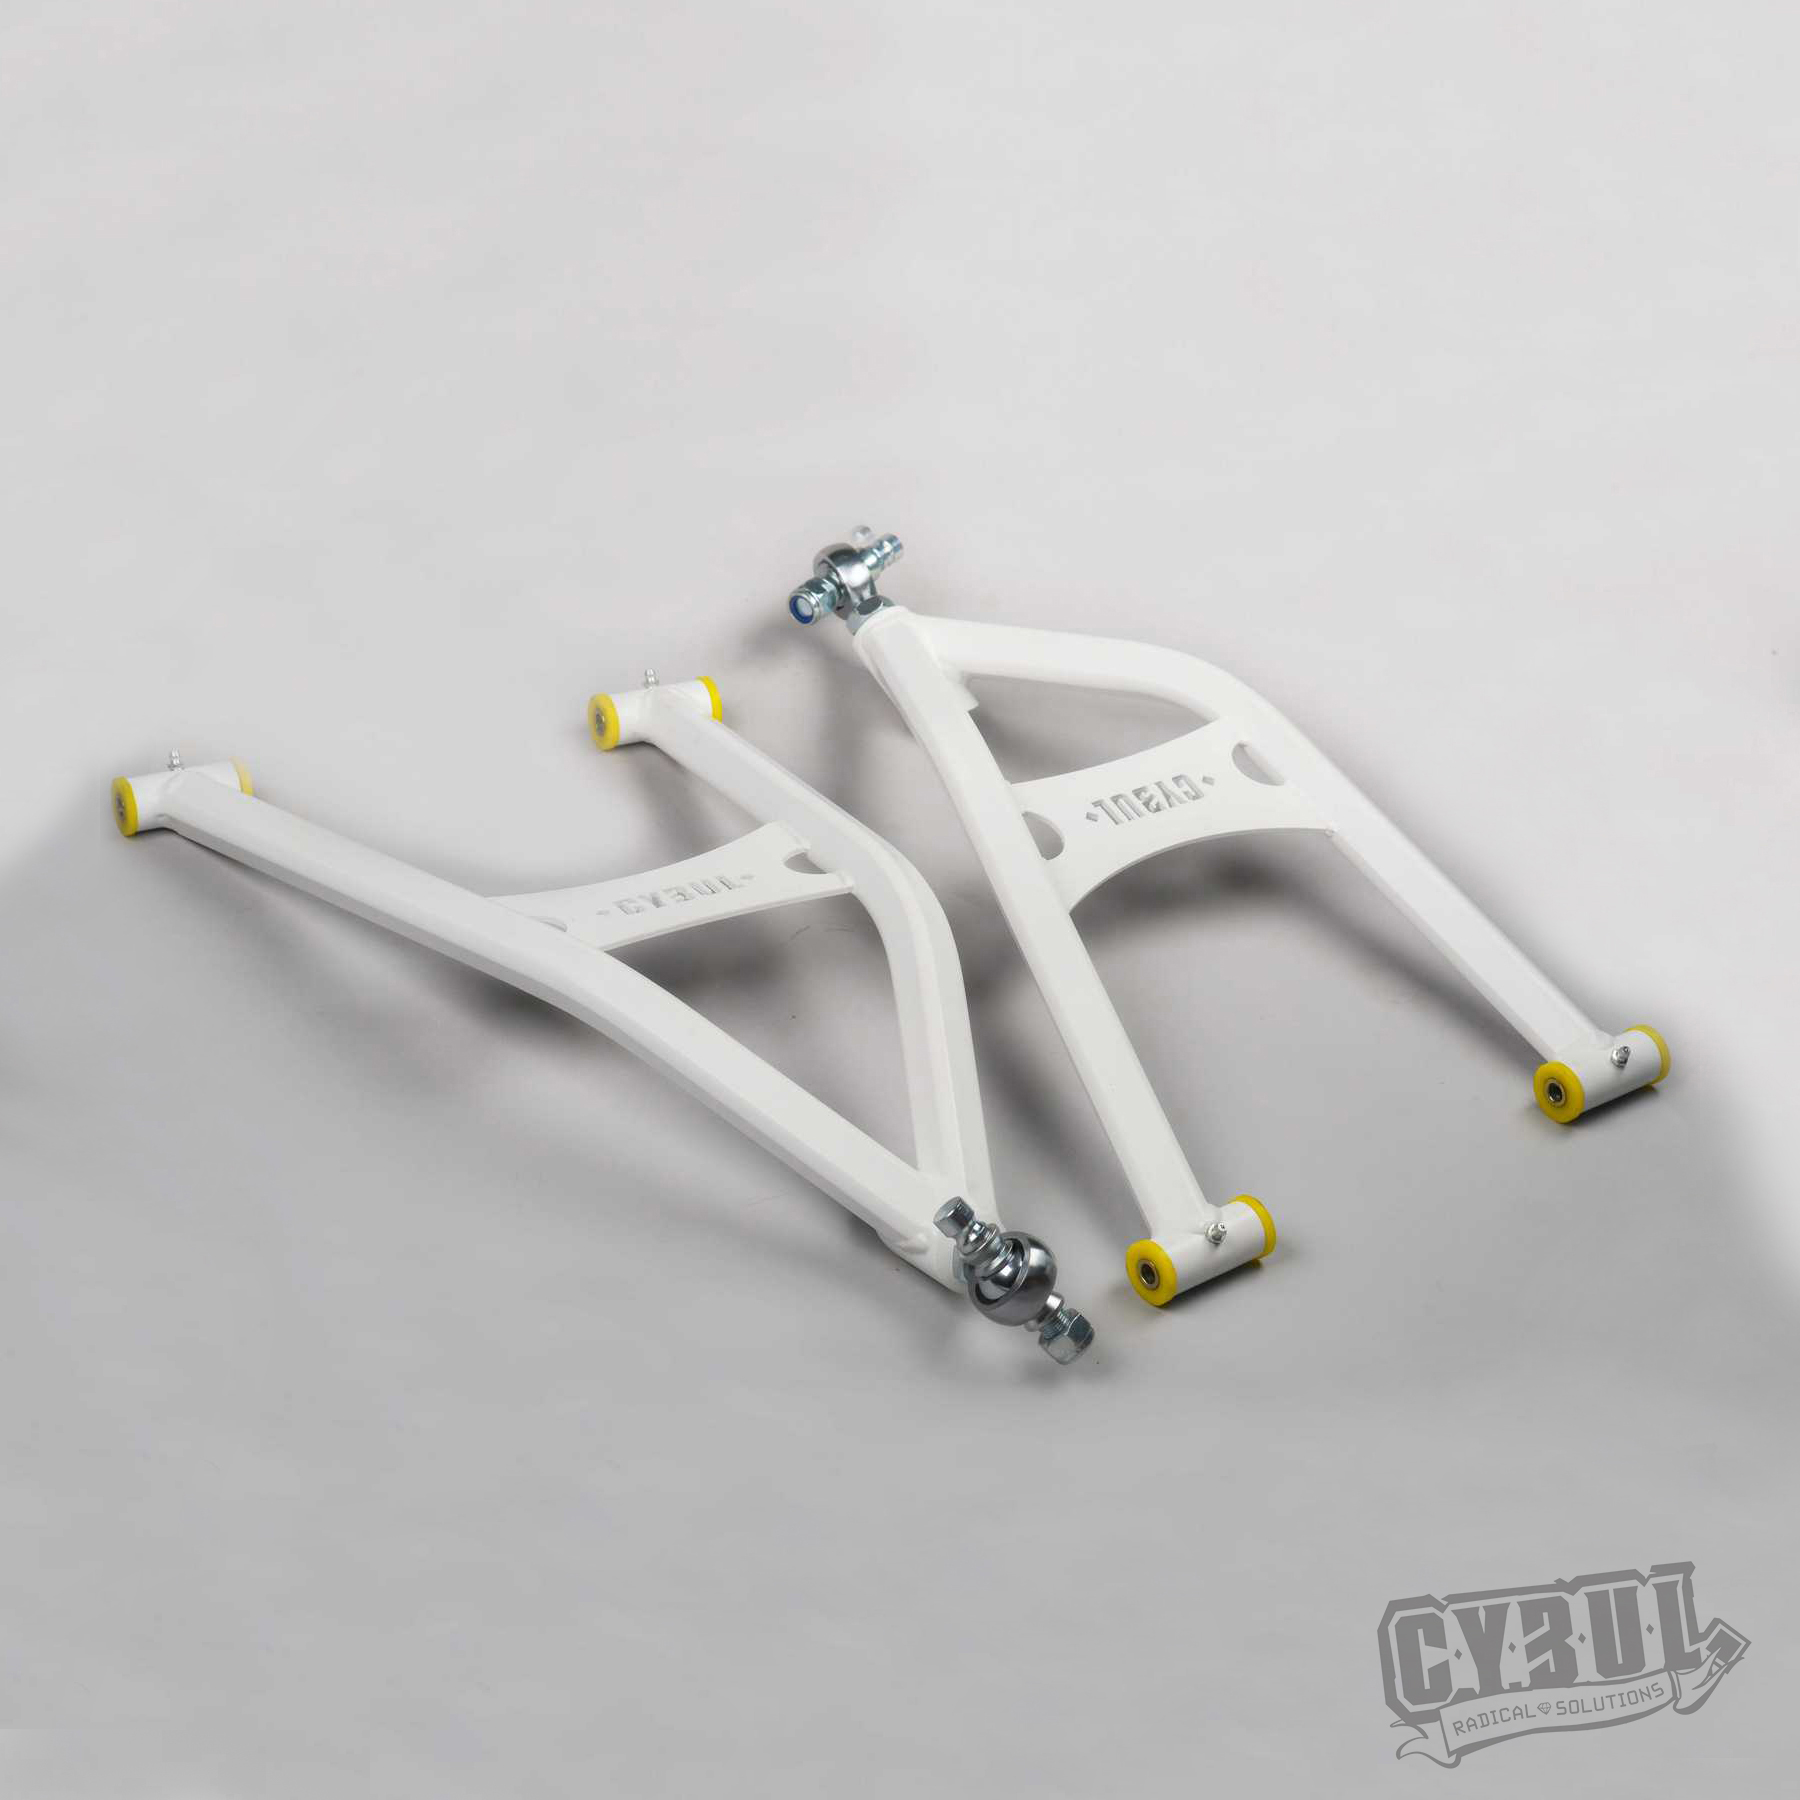 Polaris RZR 1000 and turbo front lower arms set by Cybul Radical Solutions